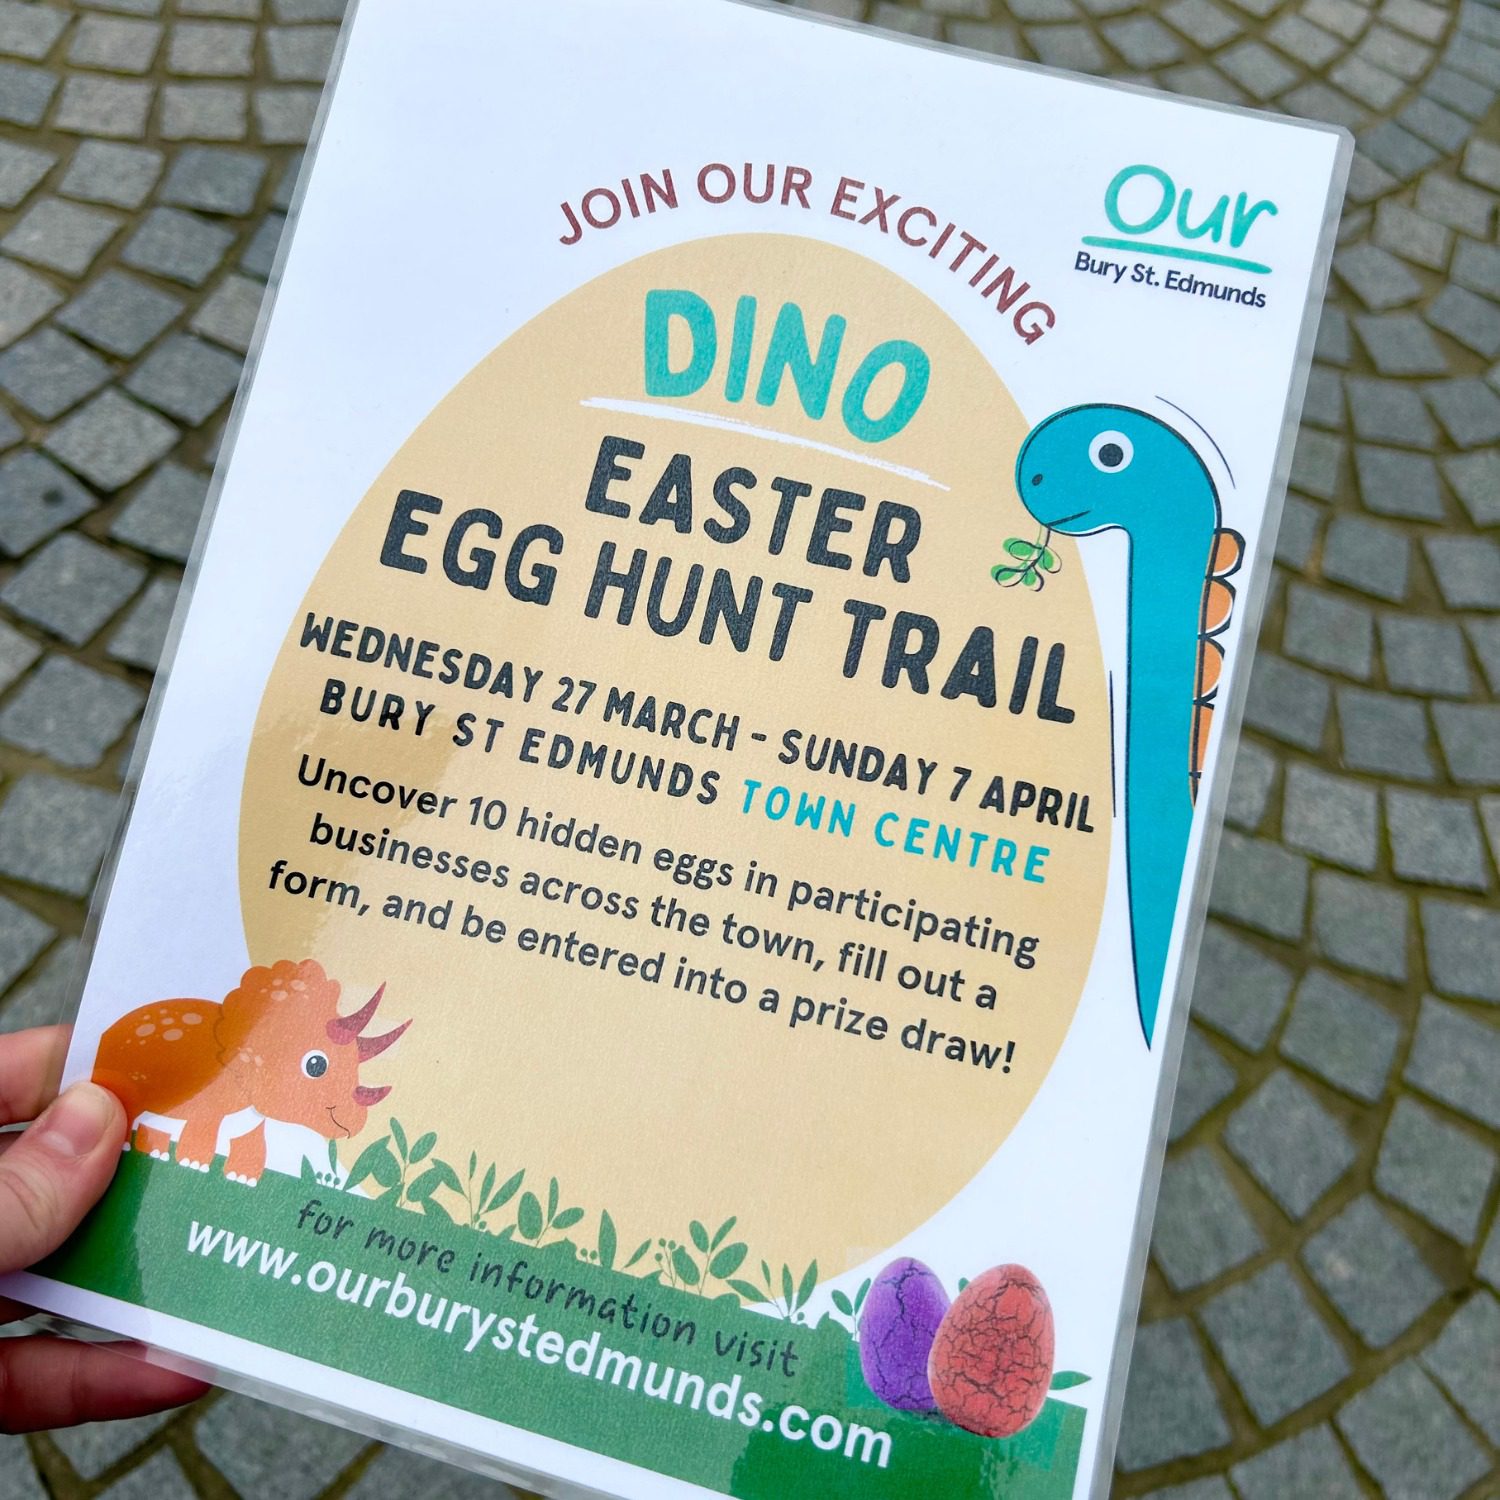 Join in the Our Bury St Edmunds Dino Easter Egg Hunt Trail this April